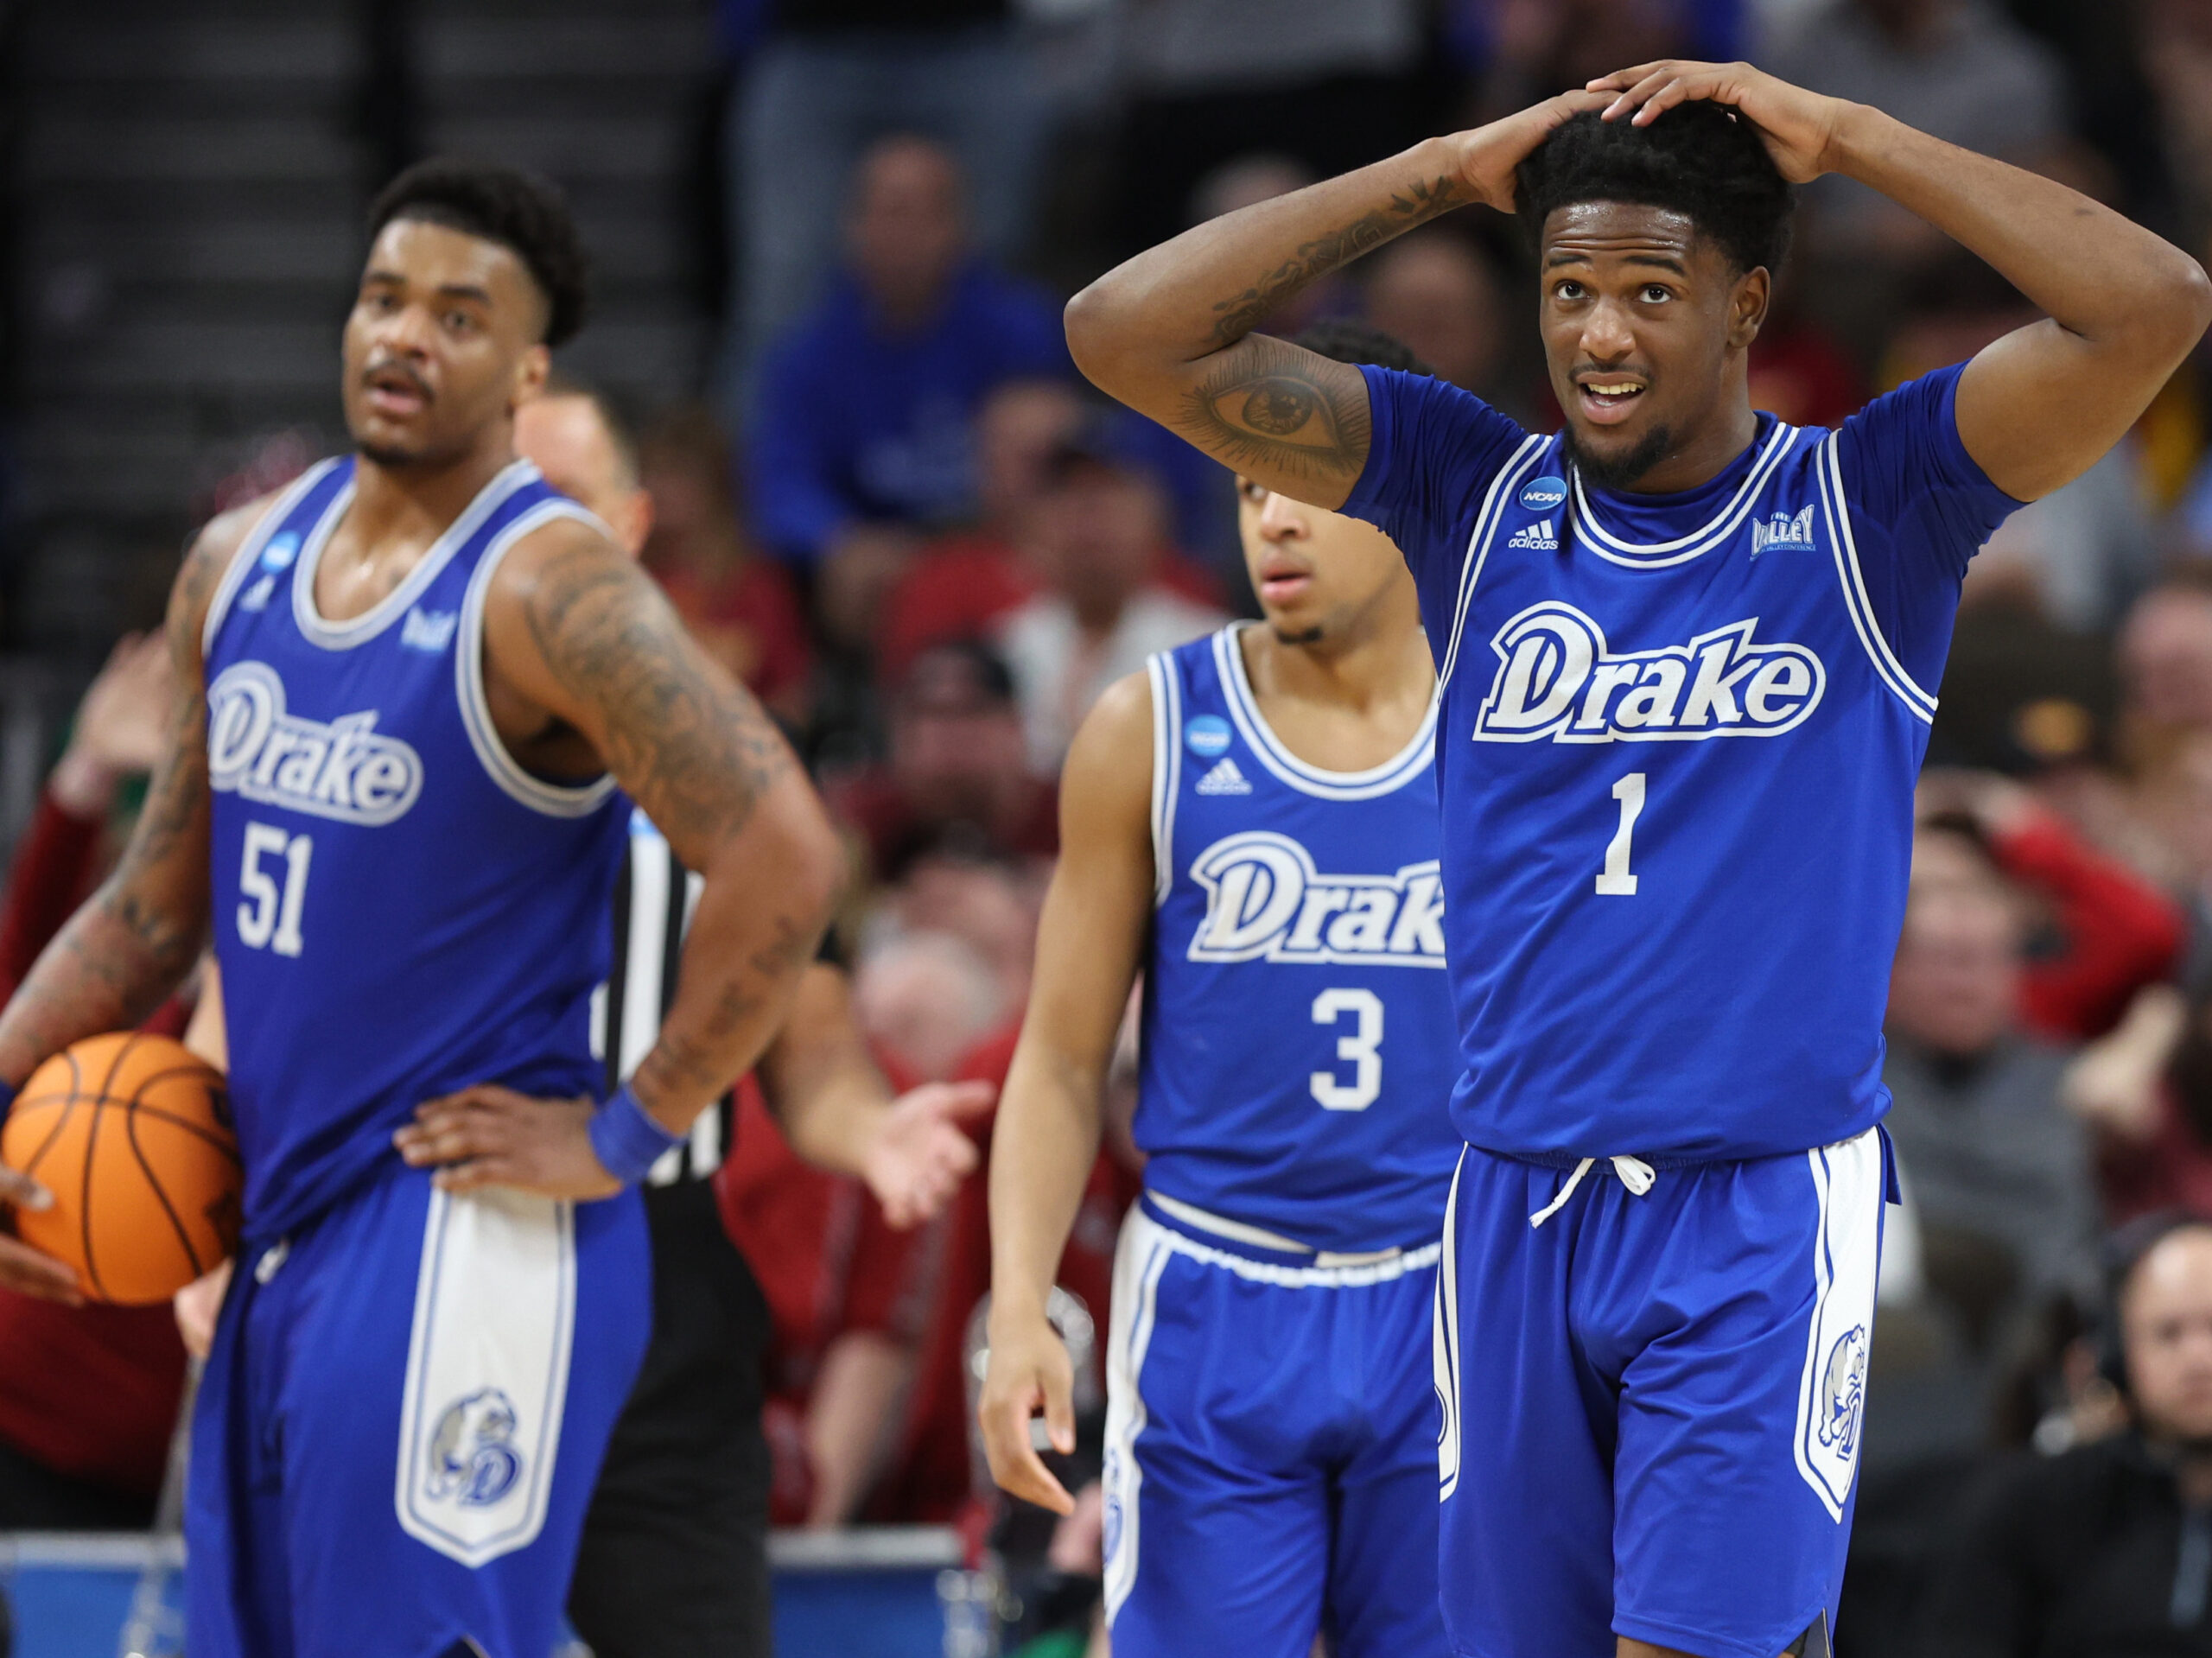 So your NCAA bracket is busted. Should you have just chosen all the top seeds?